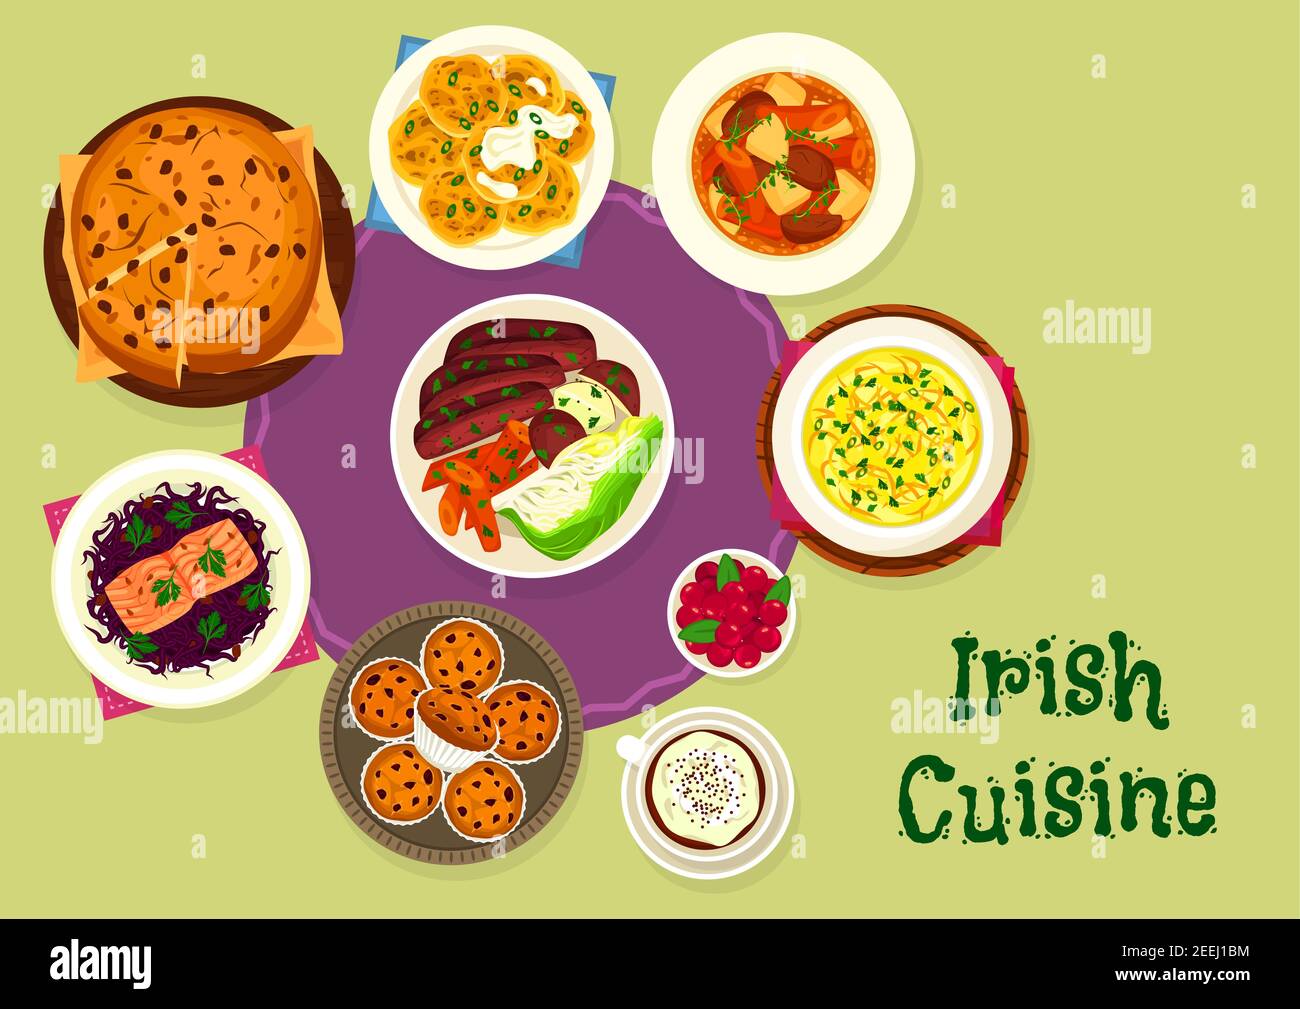 Irish cuisine tasty dinner menu icon of lamb vegetable stew, beef with cabbage and potato, salmon with red cabbage salad, mashed potato with cabbage a Stock Vector